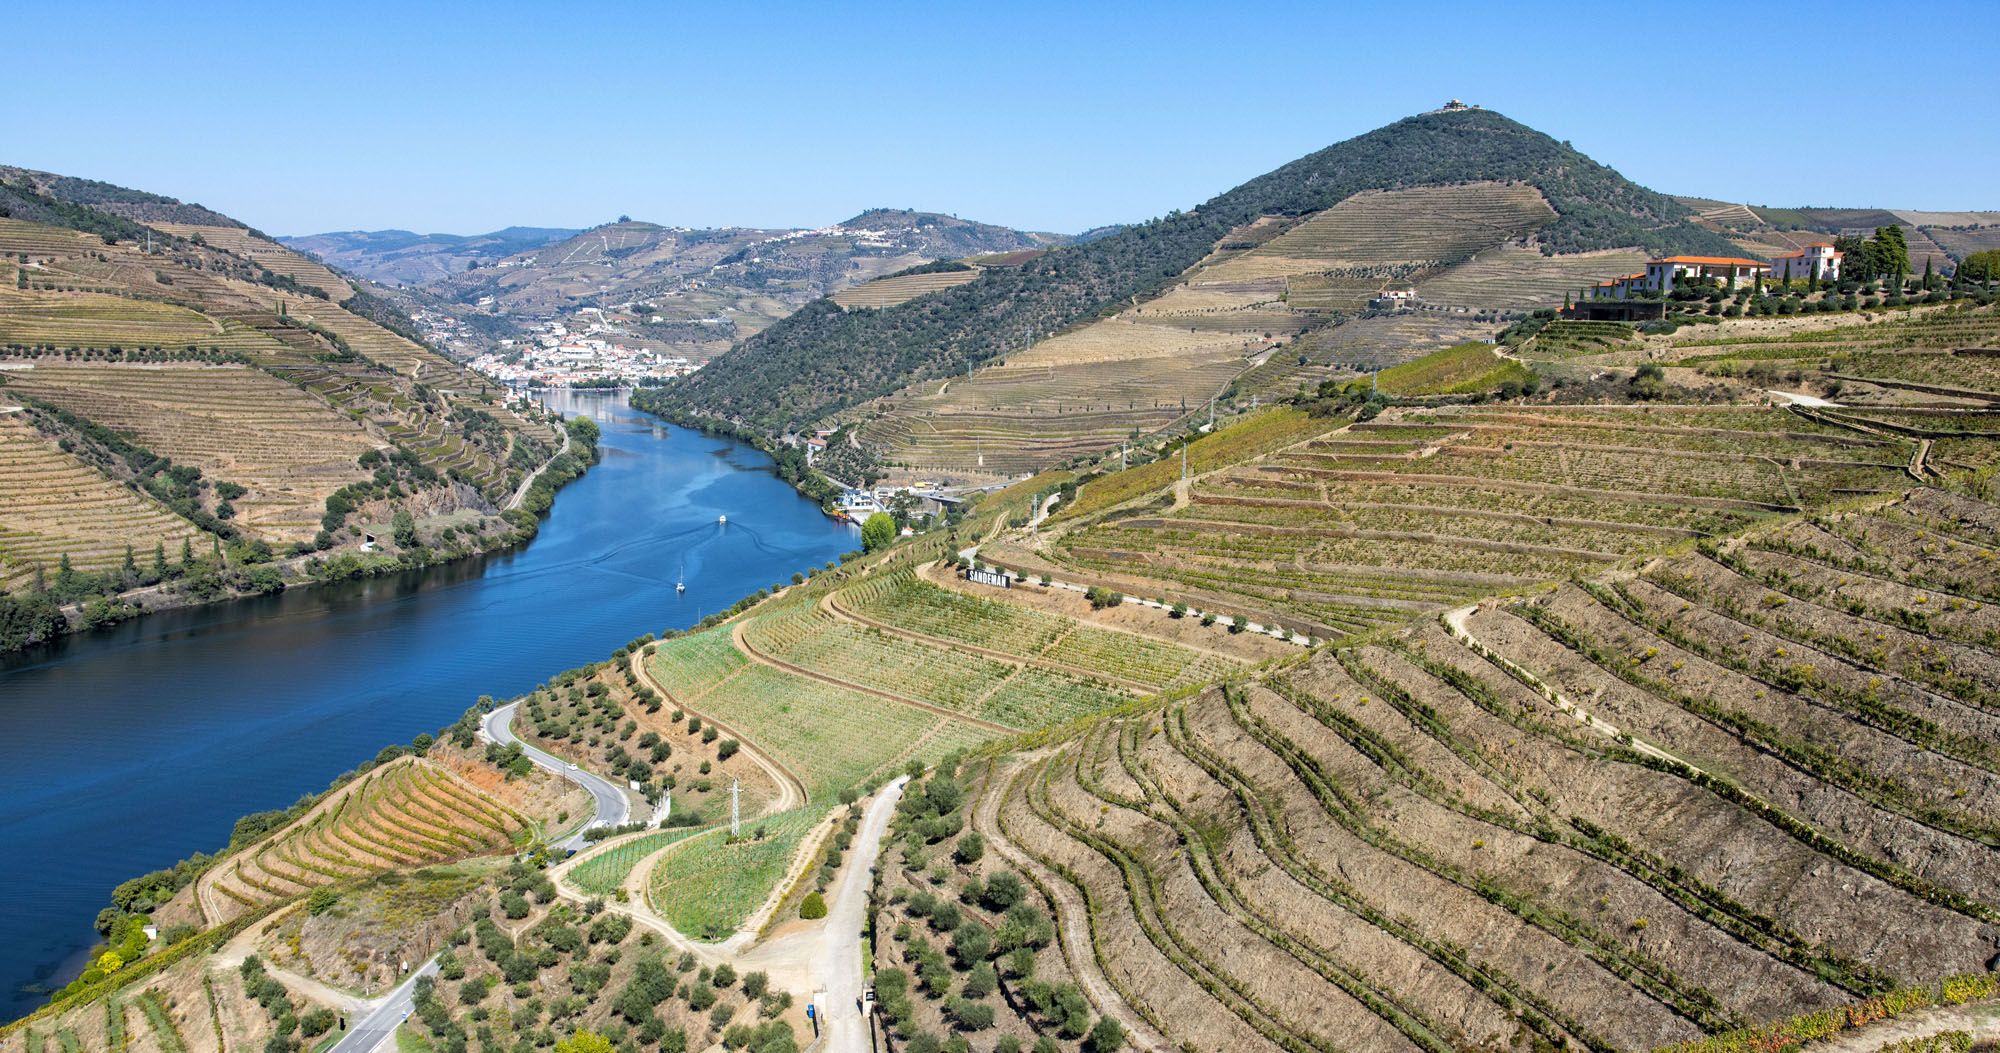 Featured image for “Douro Valley Travel Guide: Things to Do, Best Wineries, Where to Eat & More”